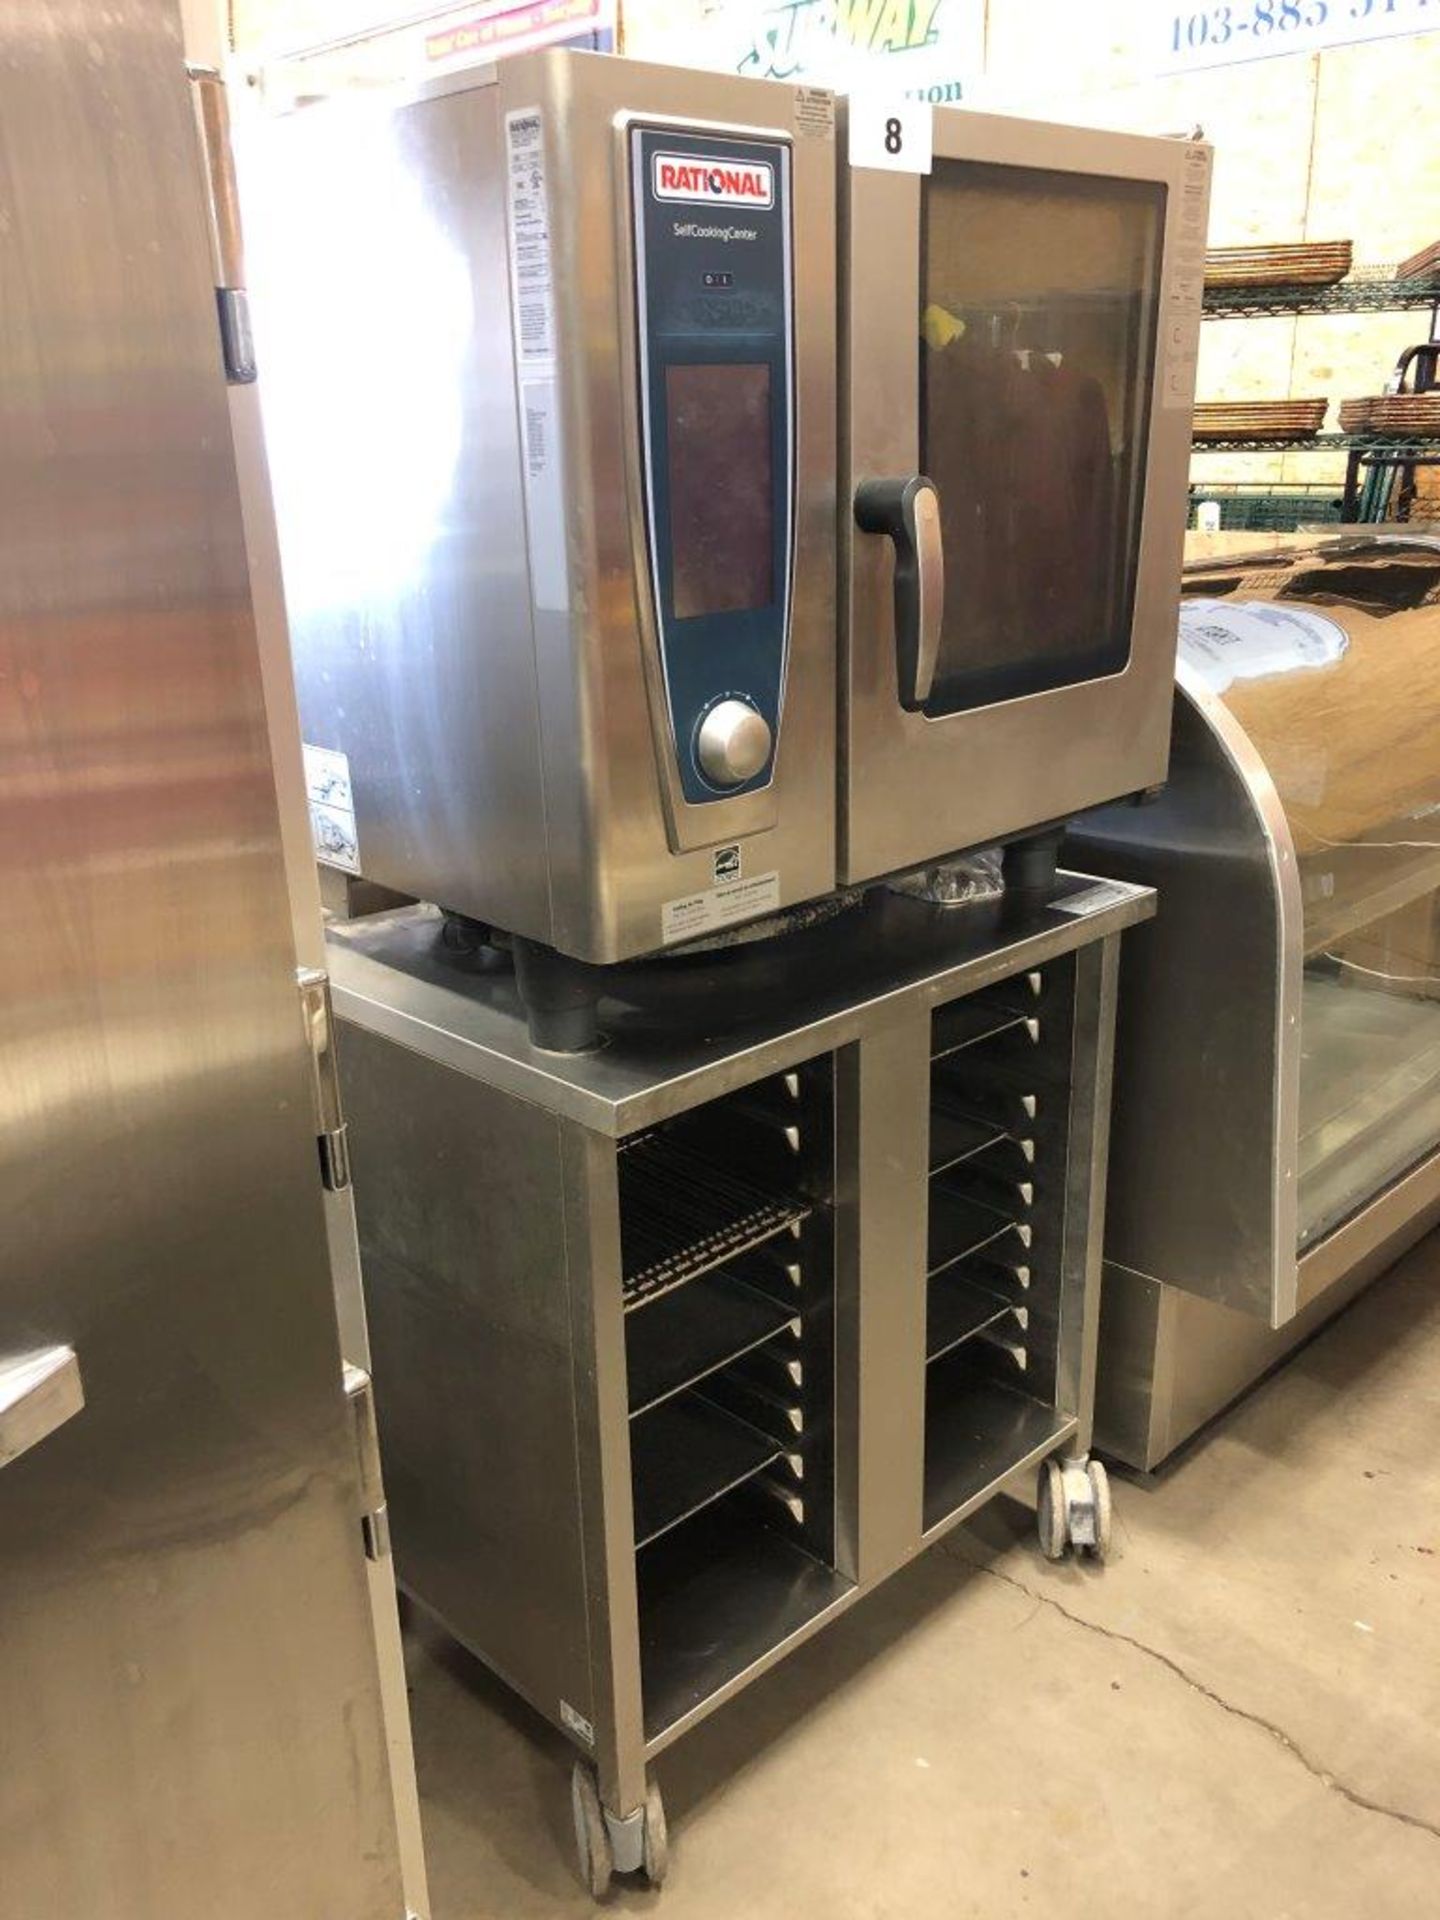 RATIONAL SCC-WE61 SELF COOKING CENTRE COMBI-OVEN W/MOBILE OVEN STAND 208V-3 PHAC, S/N